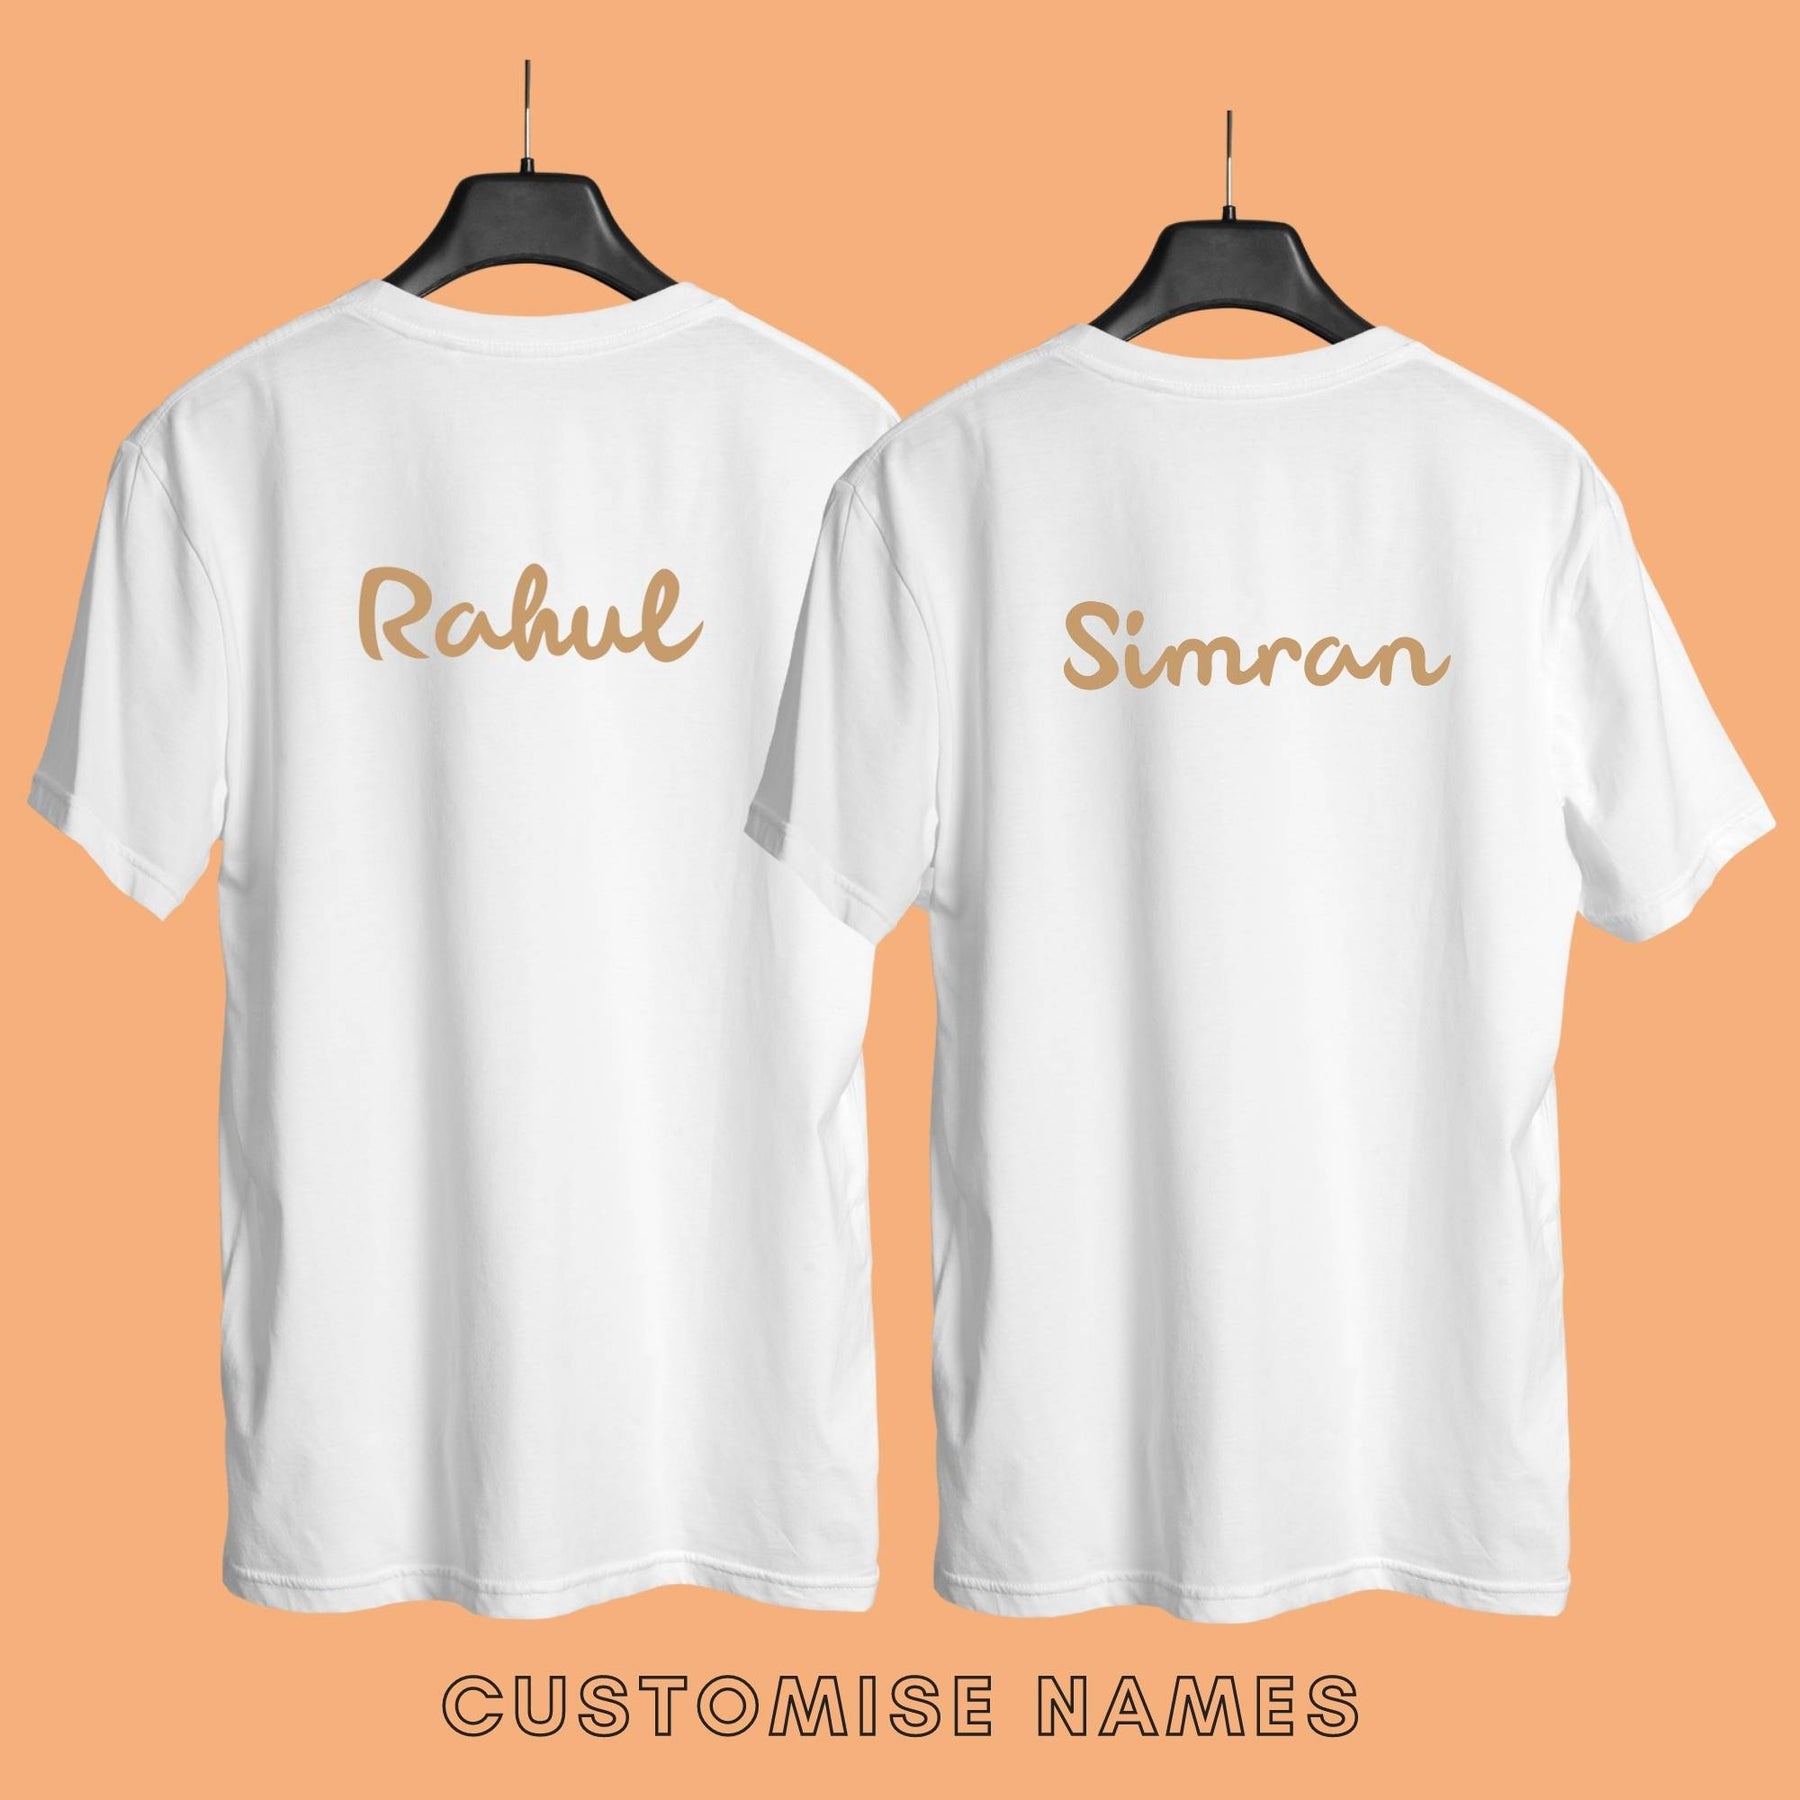 Beauty-and-beast-couple-t-shirt-with-front-and-back-print-customizable-white-color-premium-quality-gogirgit-back-shot